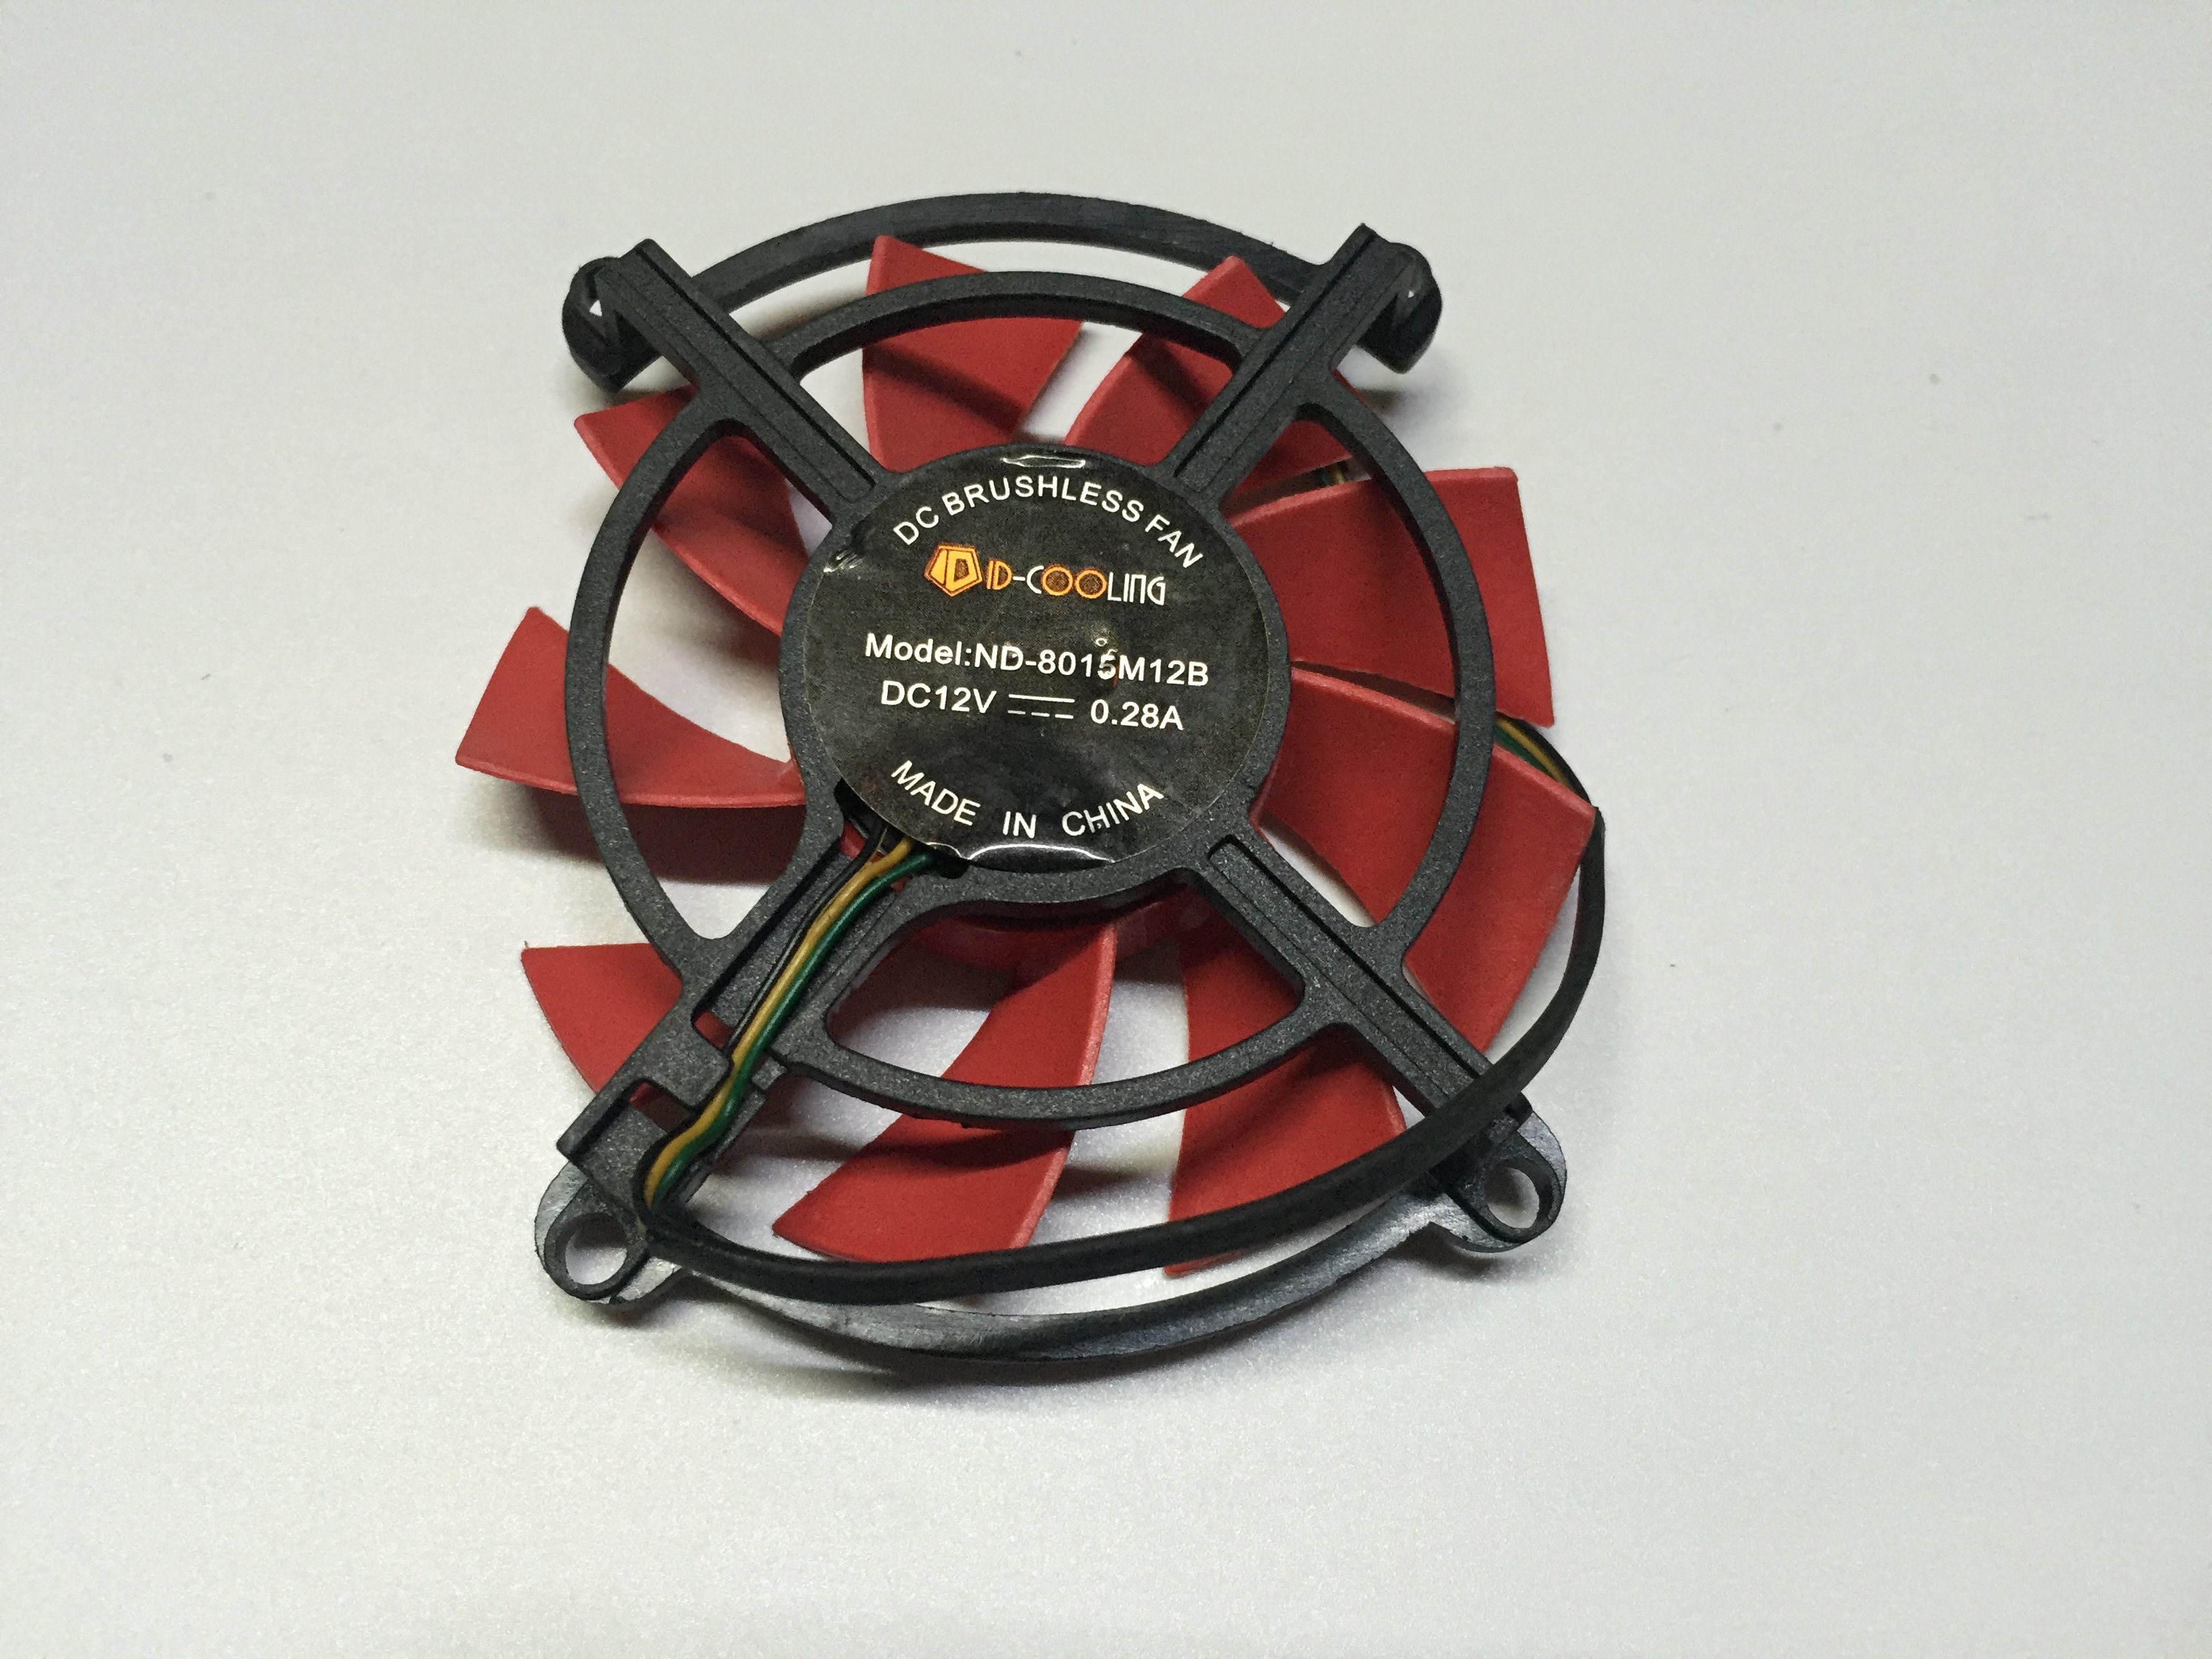 ASL GT740 GTX750 ND-8015M12B DC12V 0.18A 4Pin 2Wire Cooling Fan